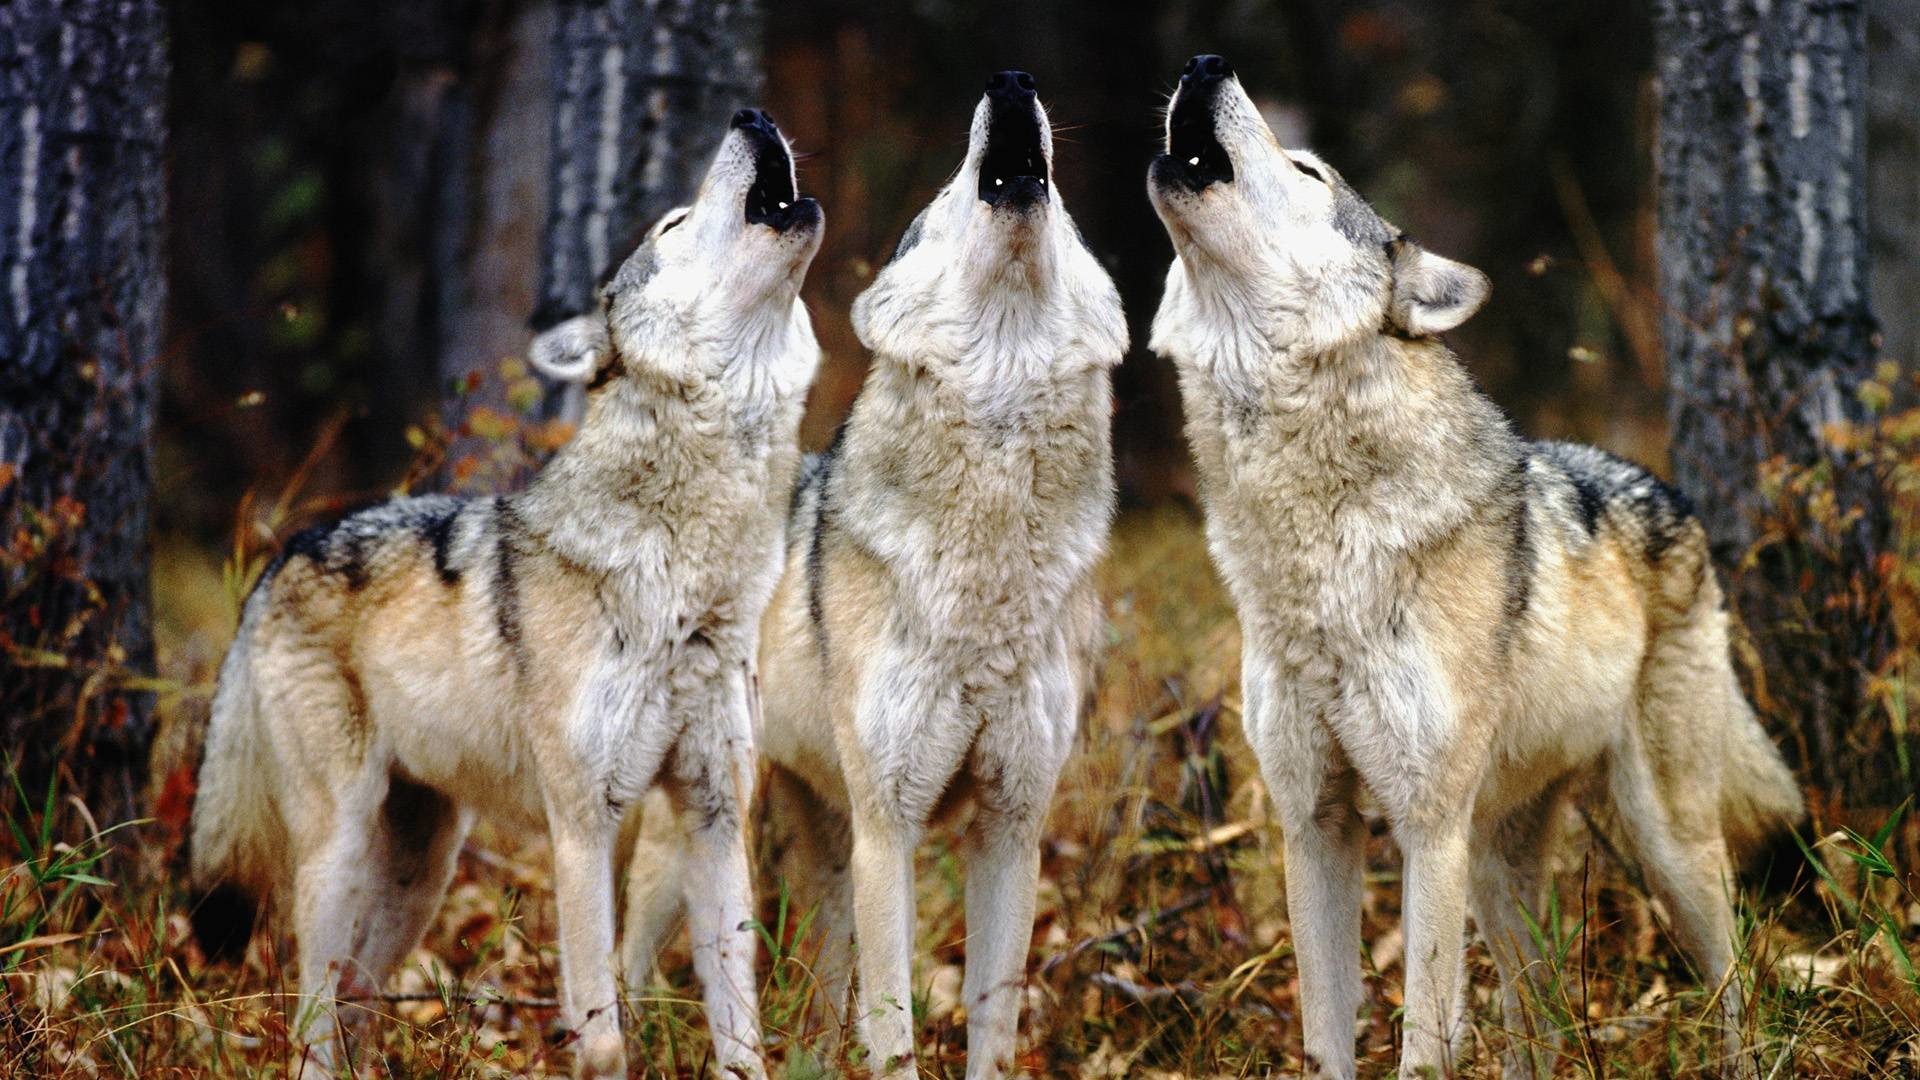 1920x1080 howling wolves, 3 wolves howling in the woods